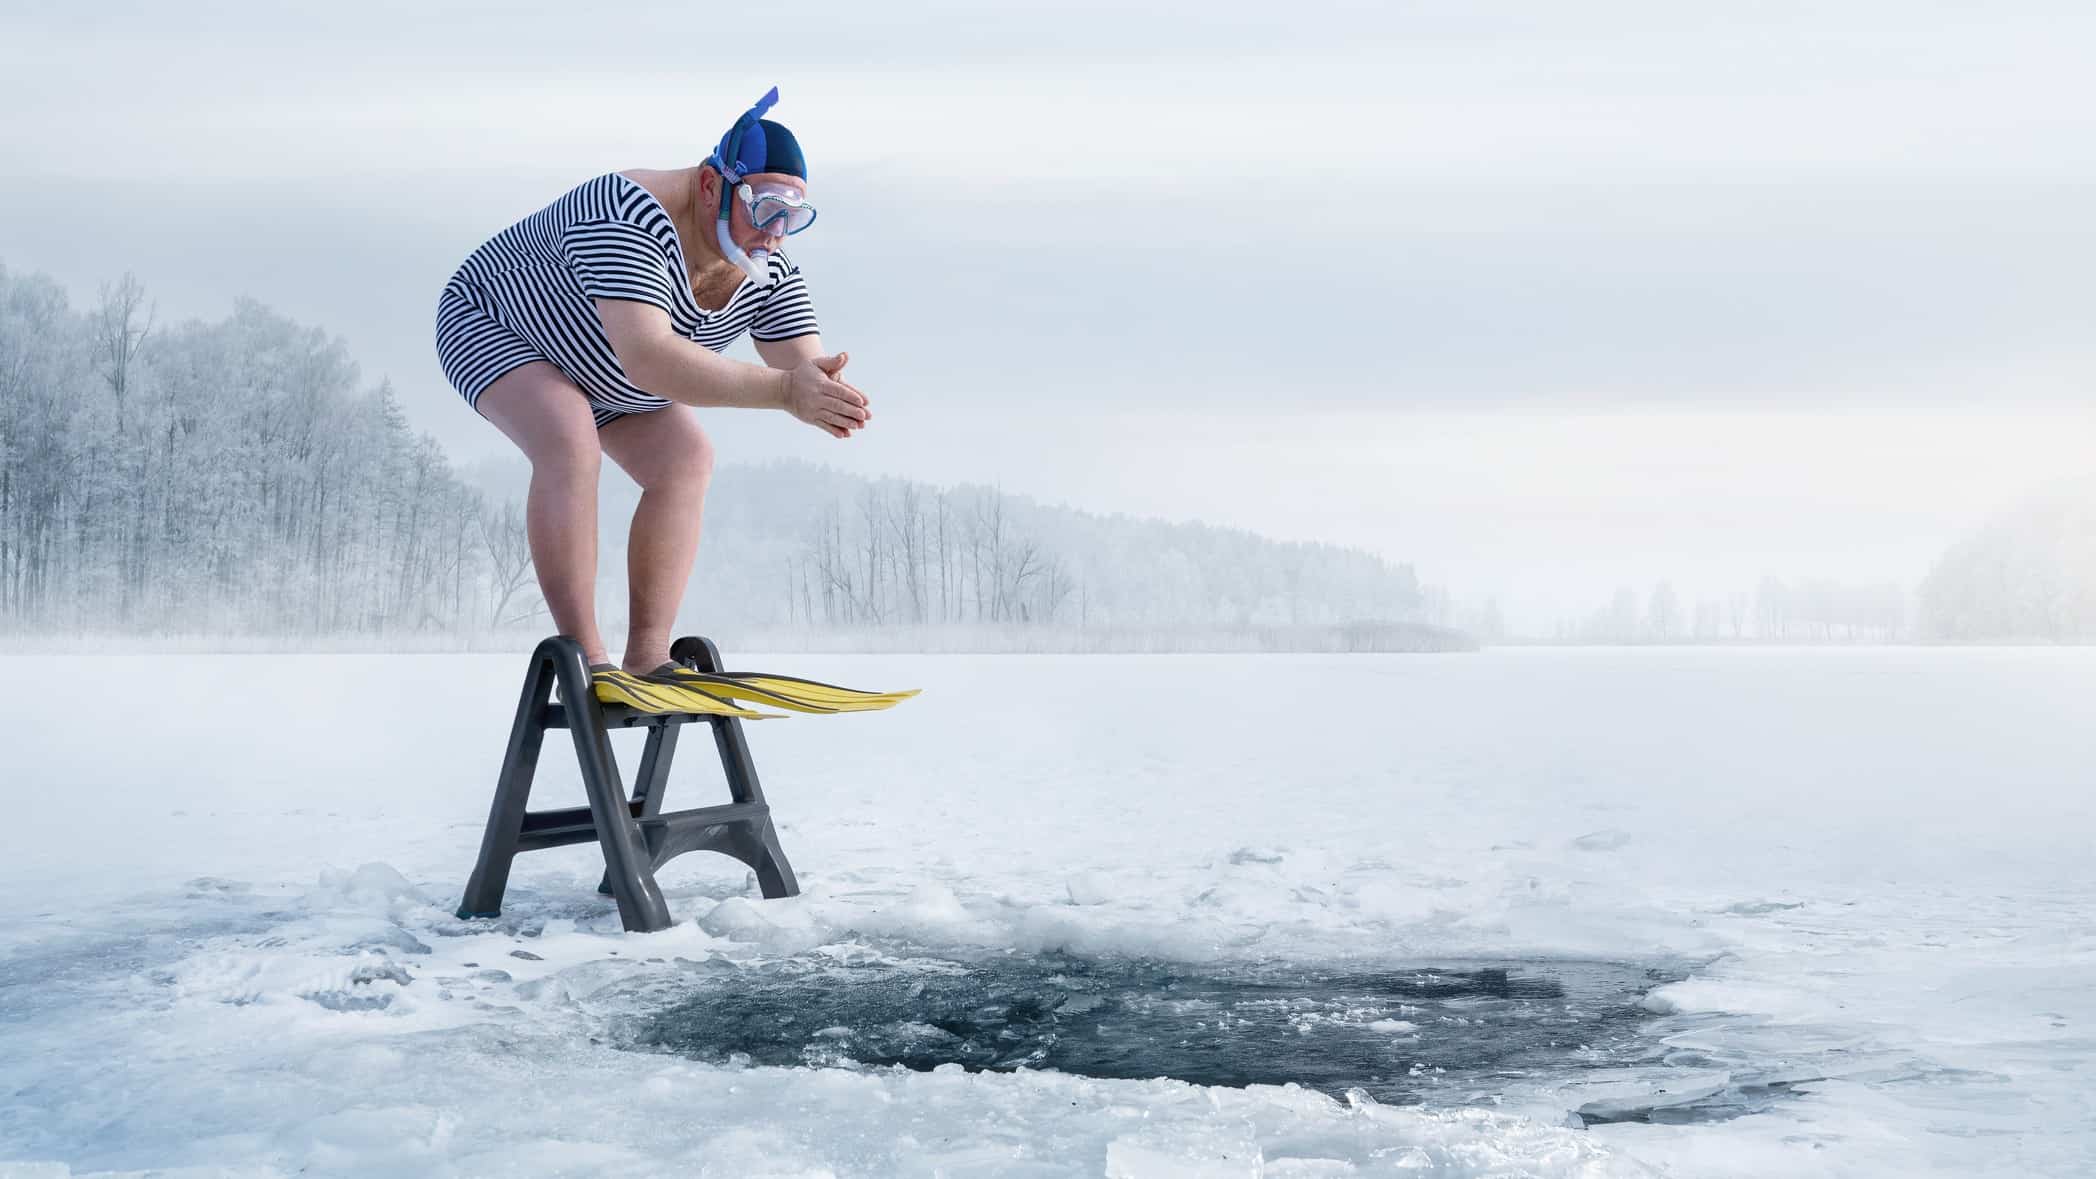 A man stands on a ladder in a stripey one-piece swimsuit, ready to plunge into the freezing water through a hole in the ice.